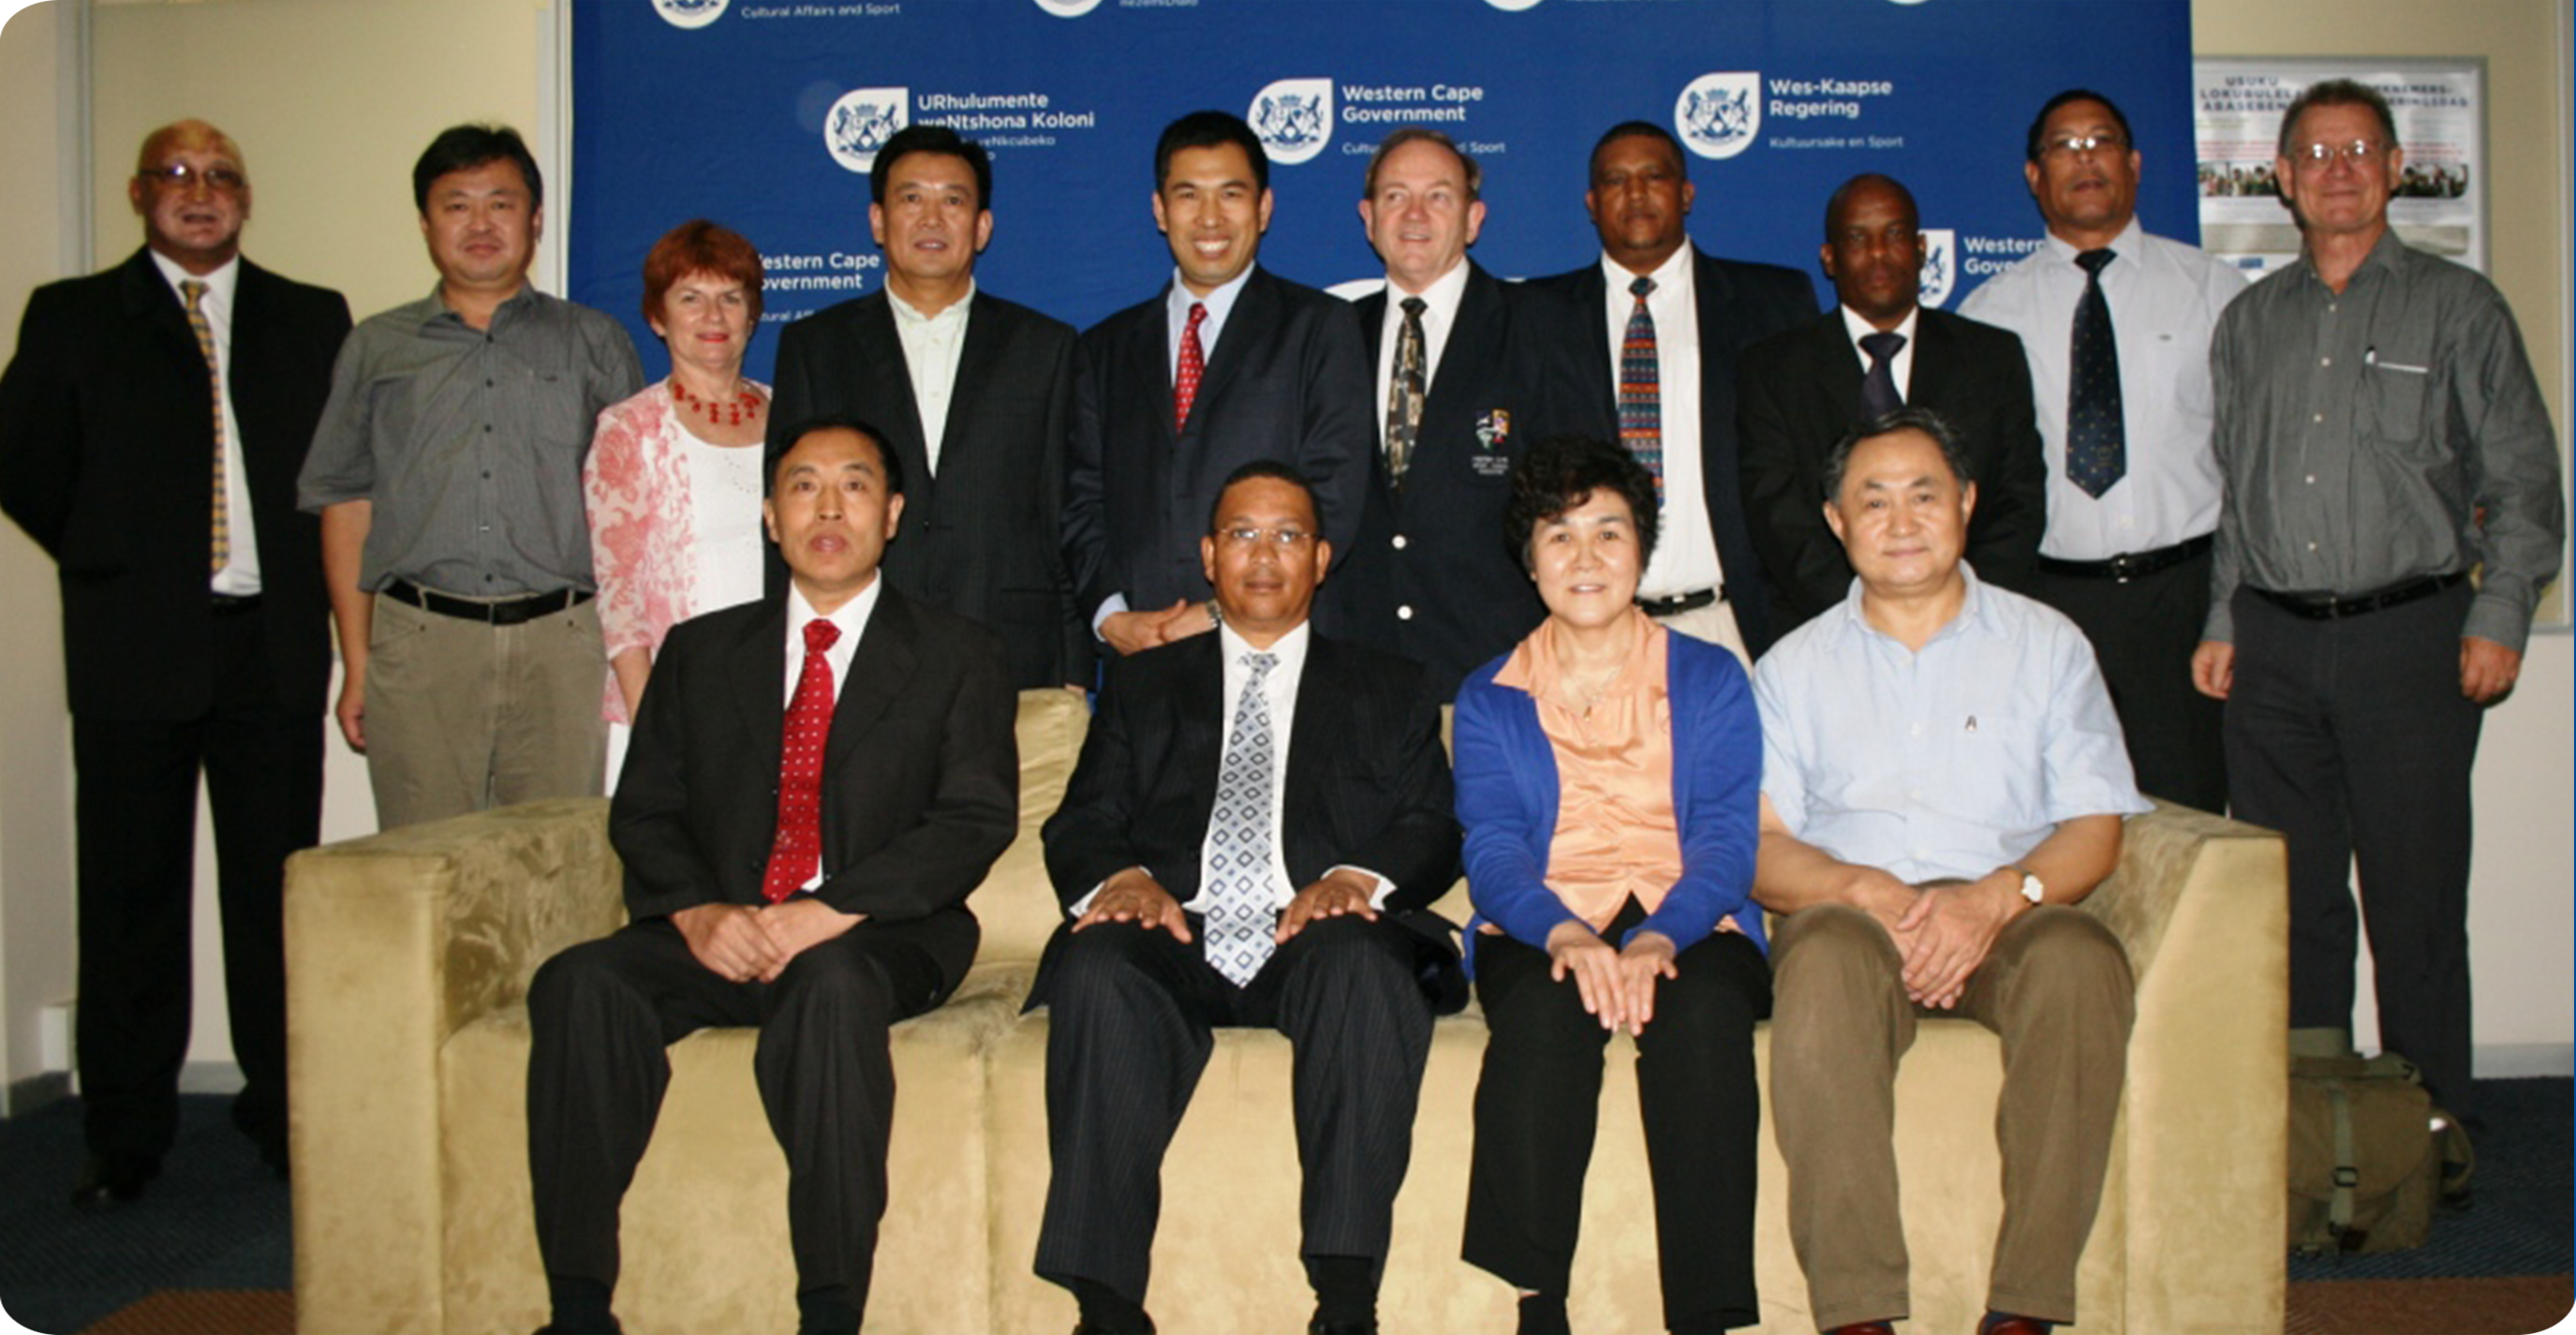 The dignitaries from the Western Cape and Shandong provinces that attended the presentation.